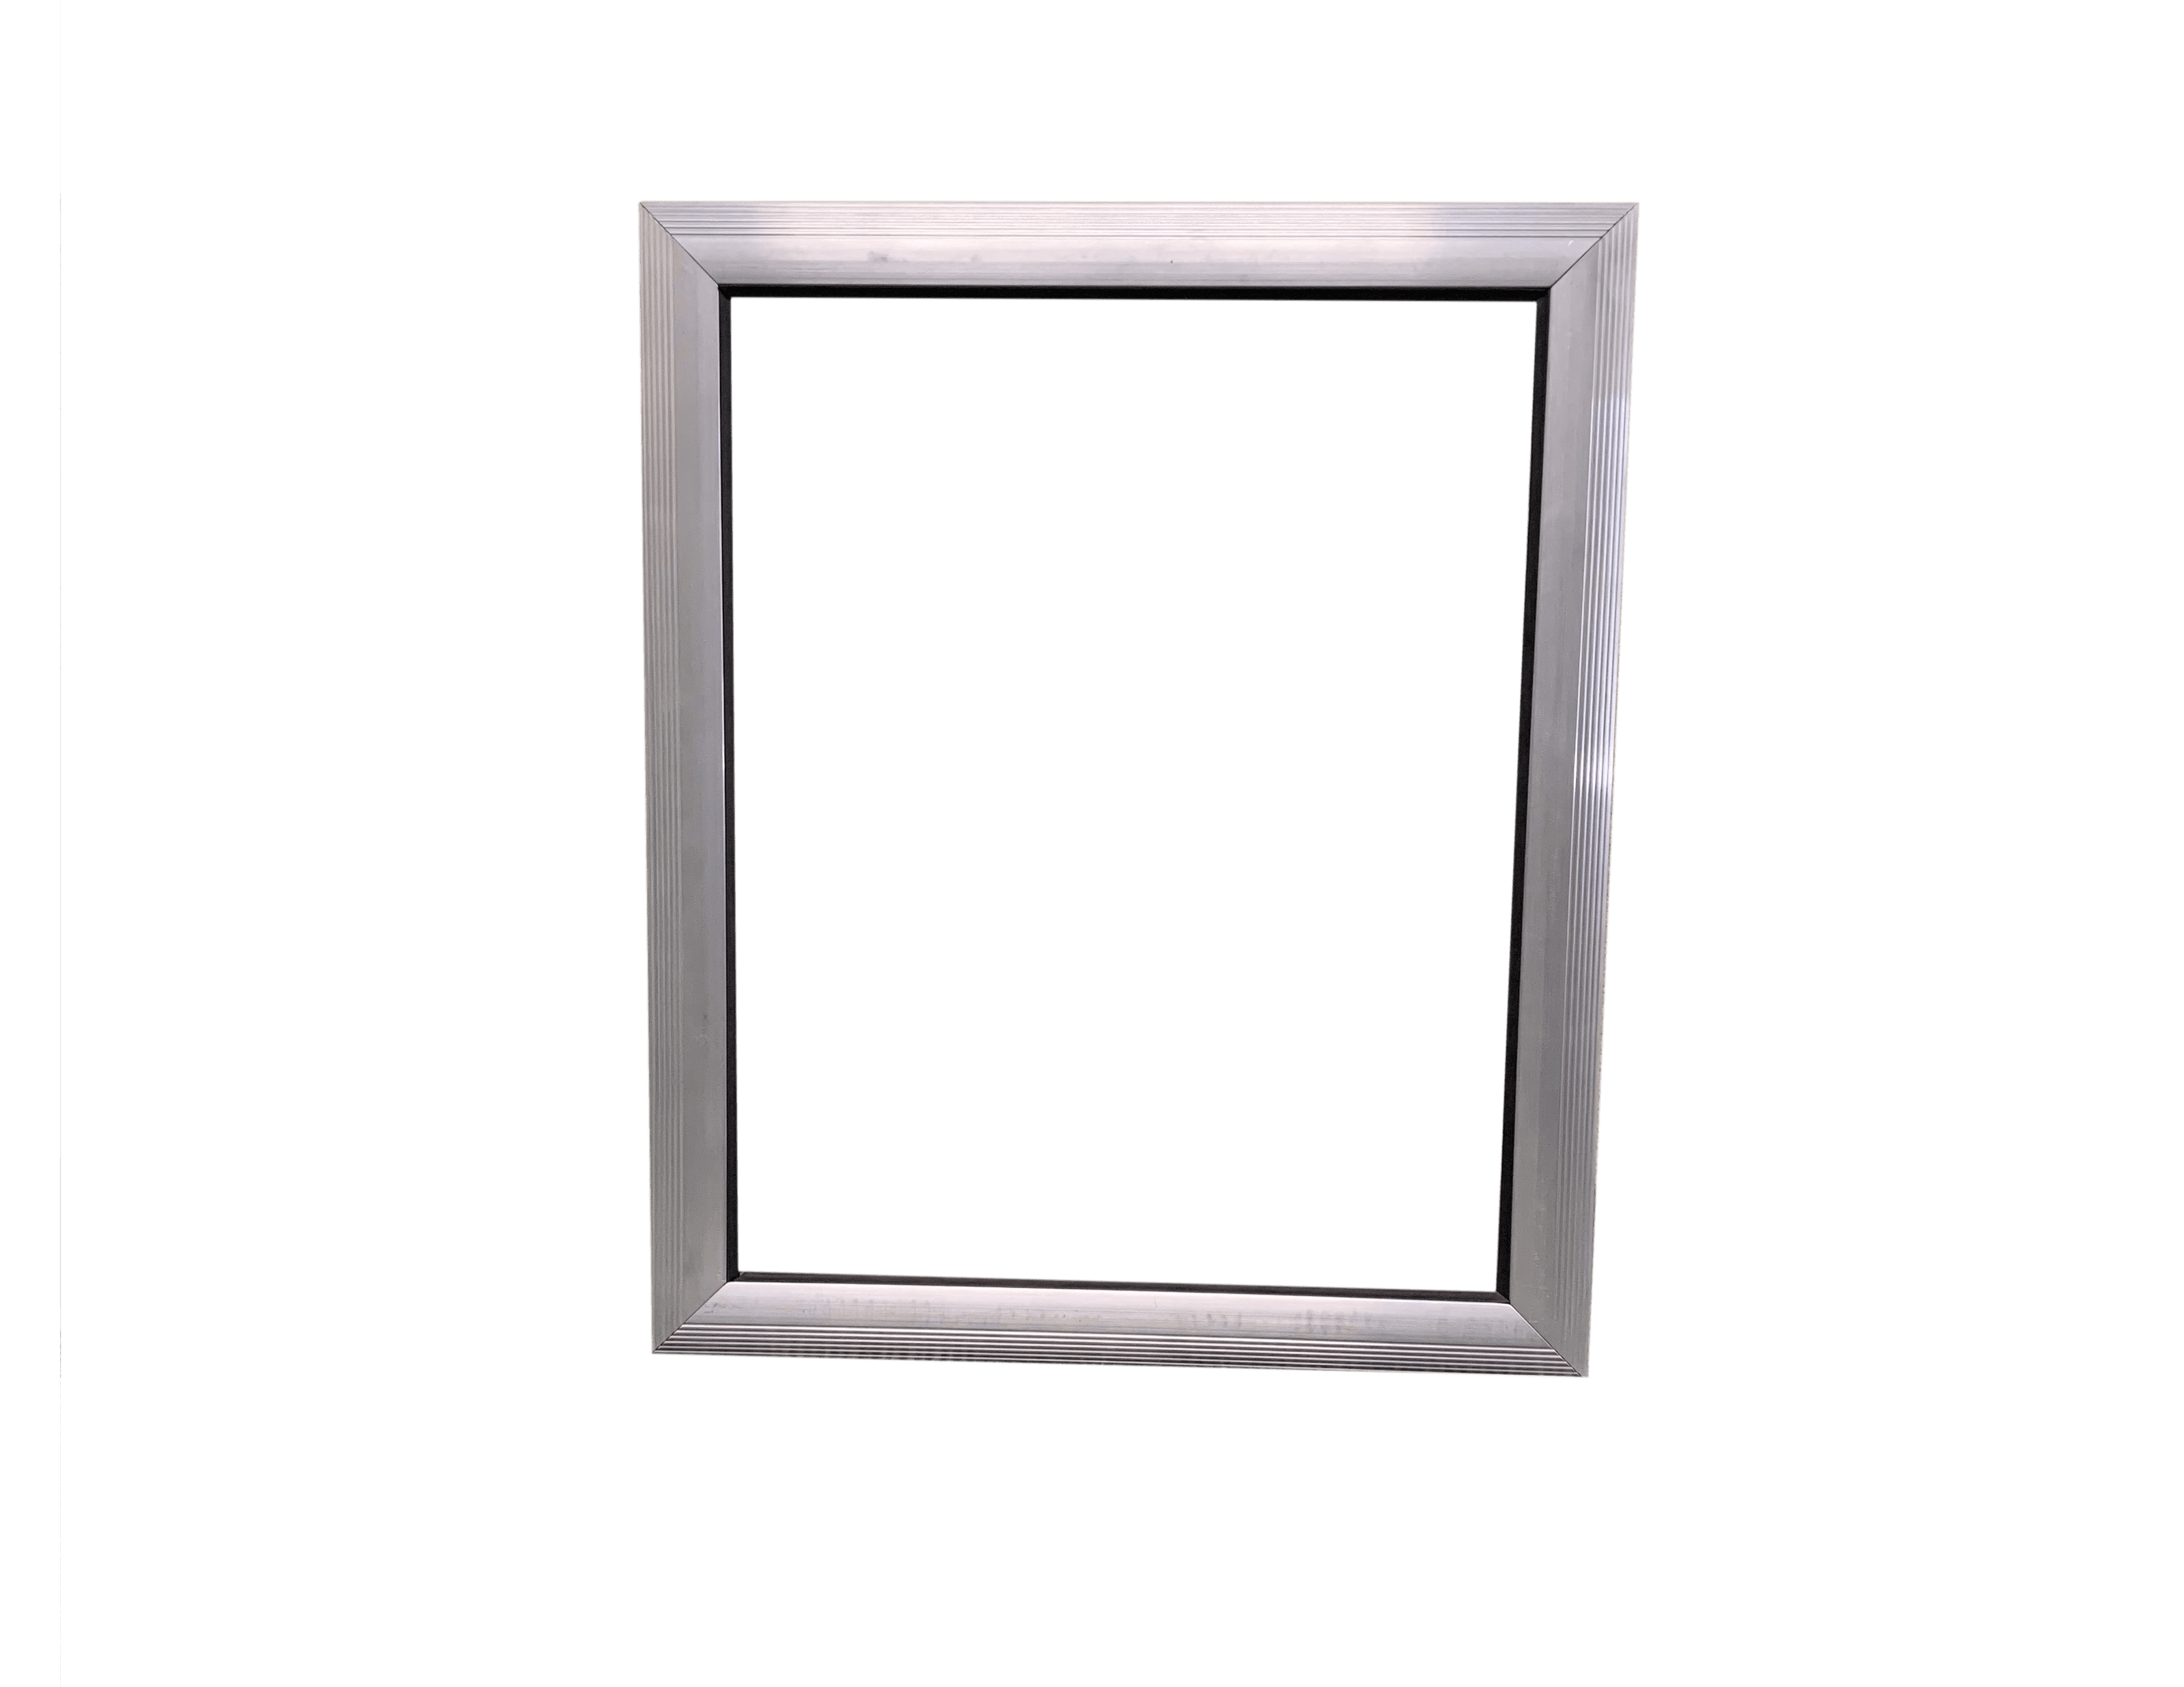 Saginaw Control SCE-AW1812SG Viewing Window - Extruded Aluminum Safety Glass, Height:22.00", Width:16.00", Depth:0.98", 